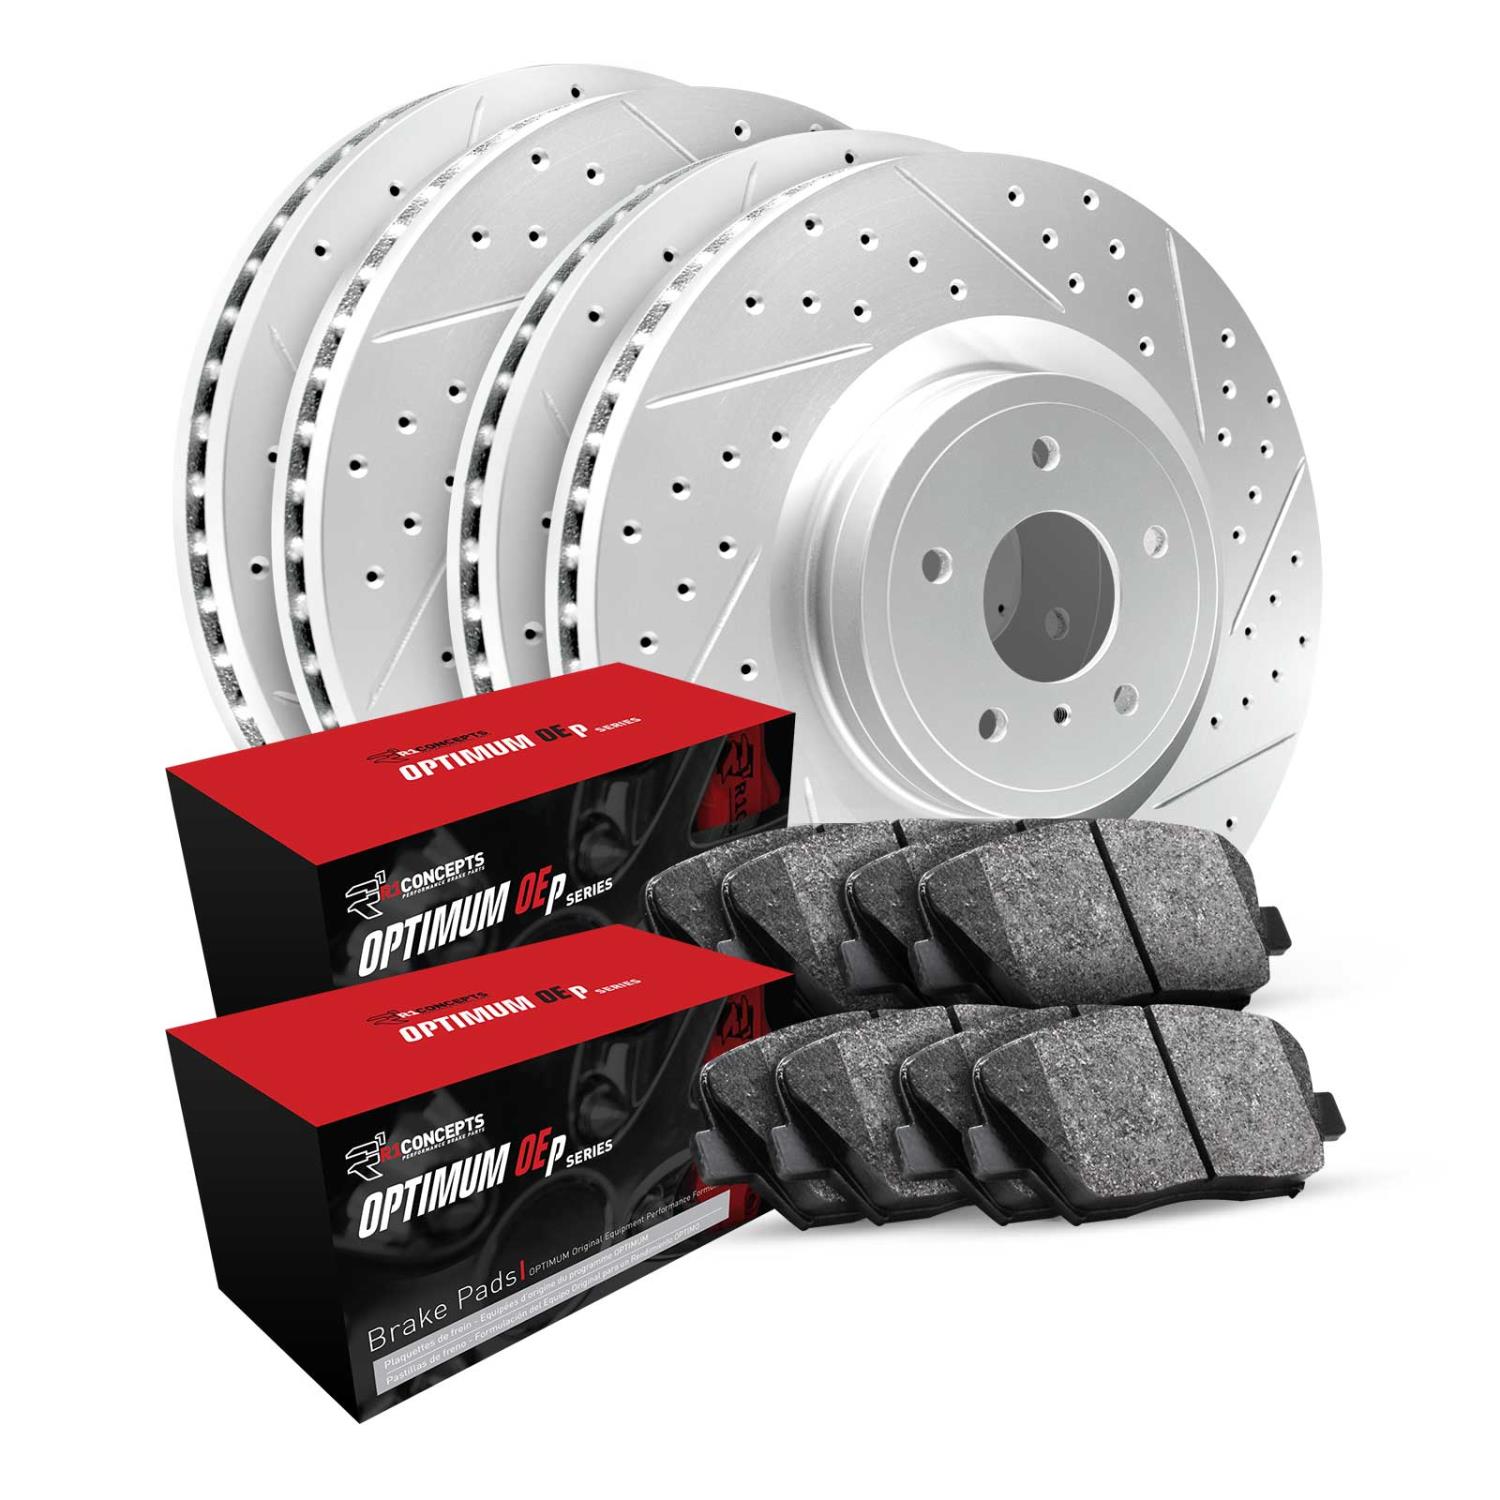 GEO-Carbon Drilled & Slotted Brake Rotor Set w/Optimum OE Pads, 2013-2020 Fits Multiple Makes/Models, Position: Rear